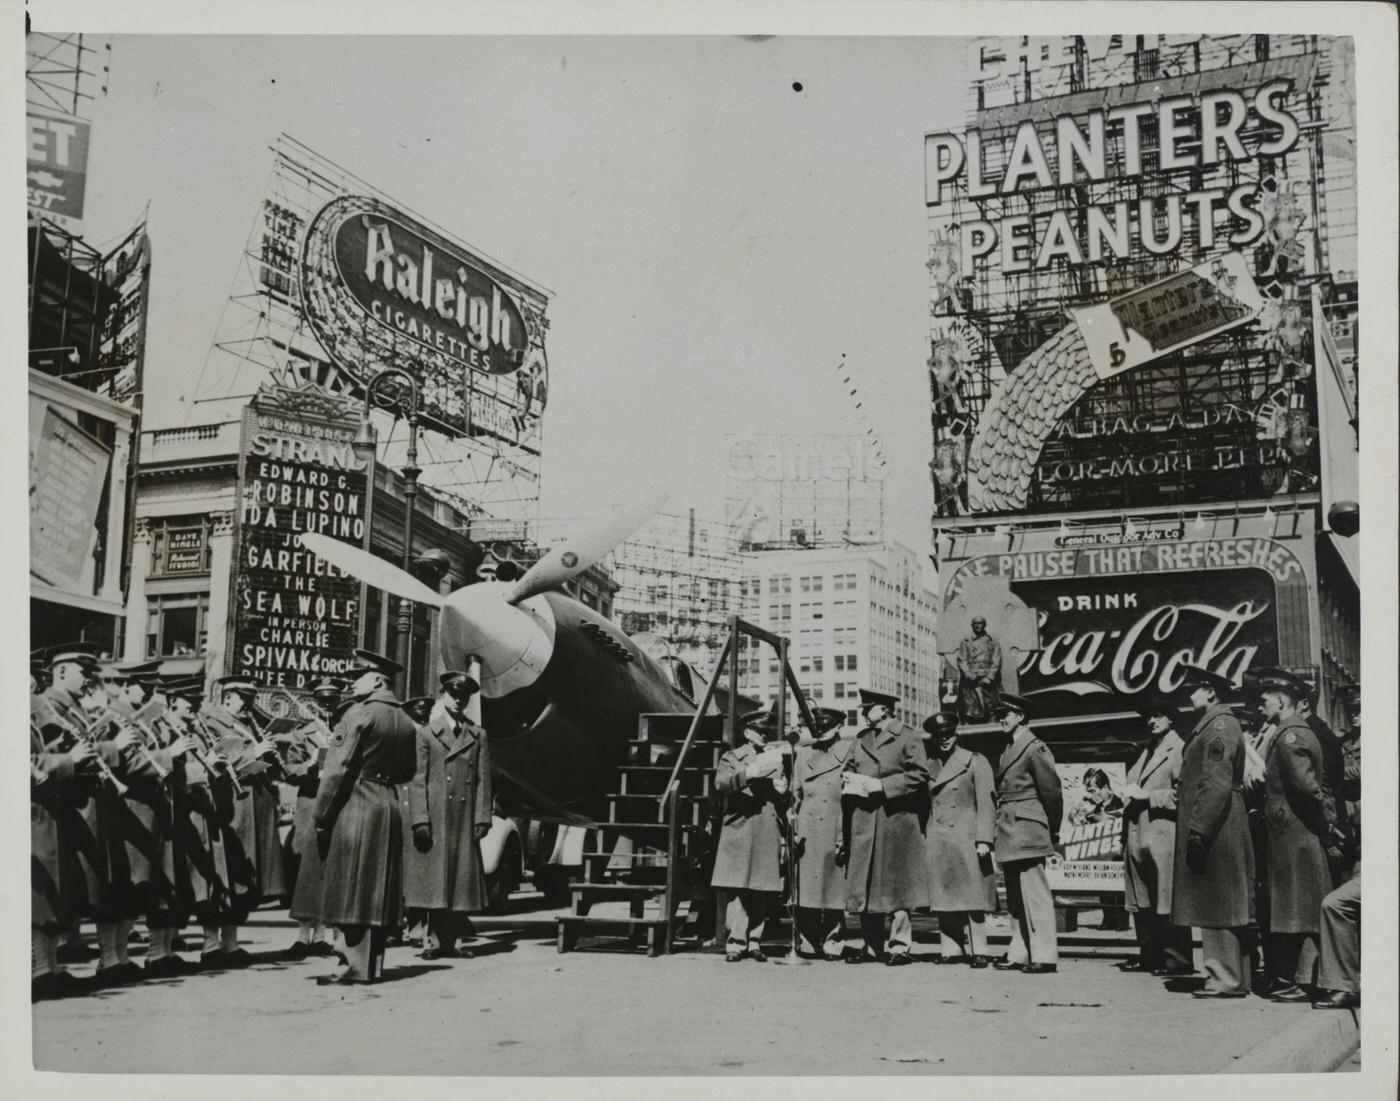 Piccadilly In New York, Installation In Duffy Square, Corner Of Times Square, Manhattan, 1940